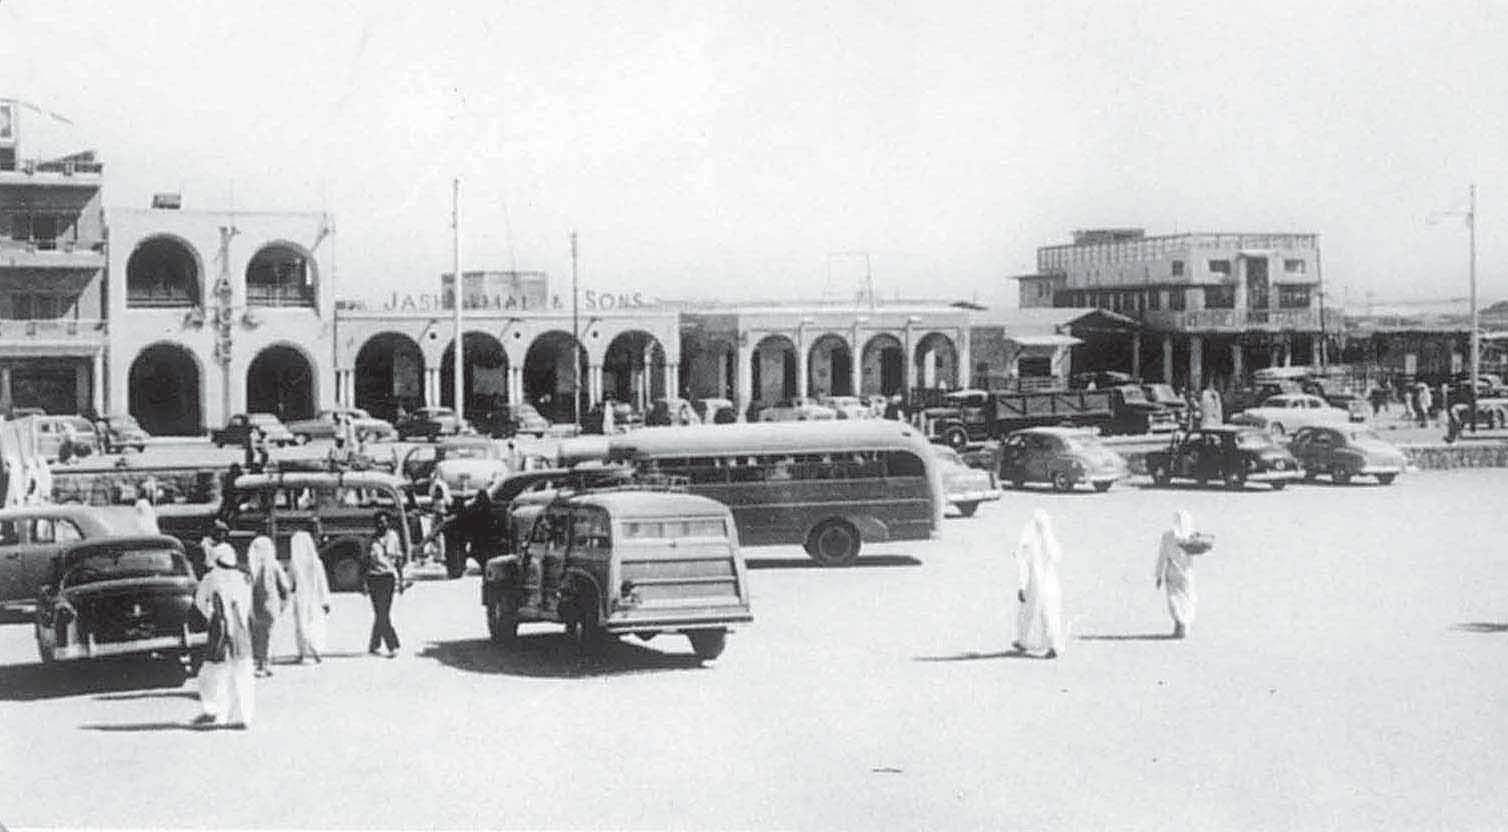 Al-Safat, Al-Manakh, and Al-Ferrdah markets were vital business hubs which steered Kuwait's economic growth in the past